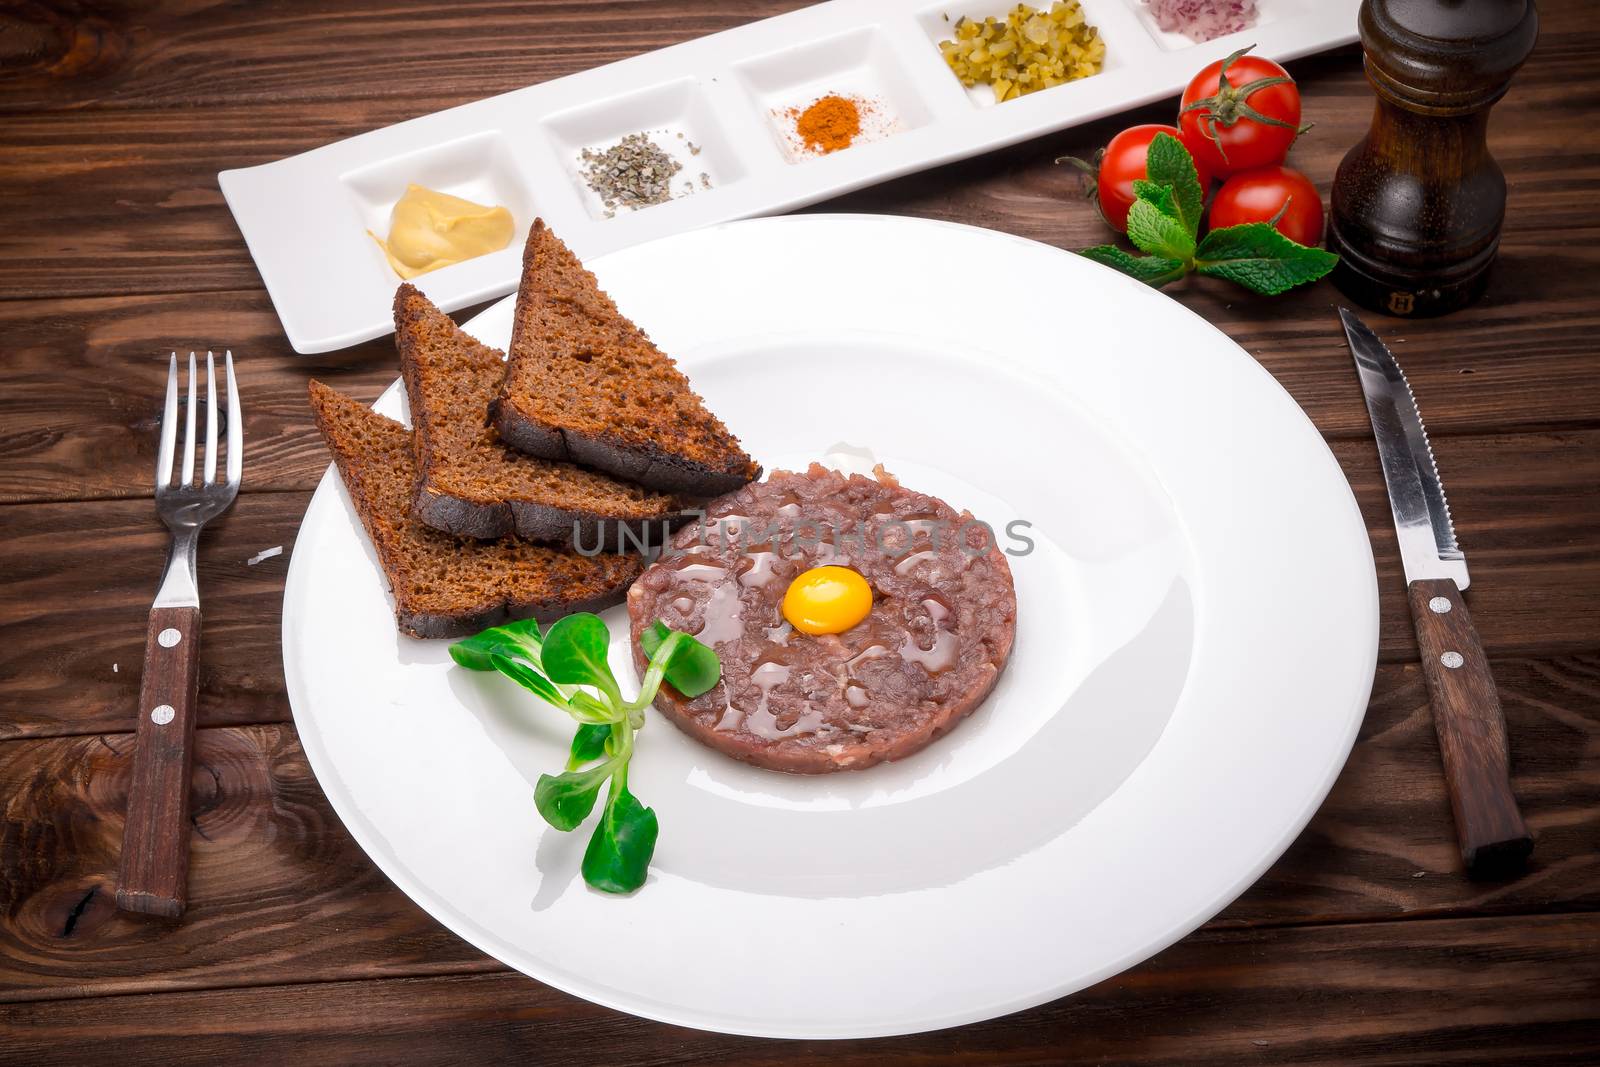 Beef tartare with spices and seasoning on wooden background